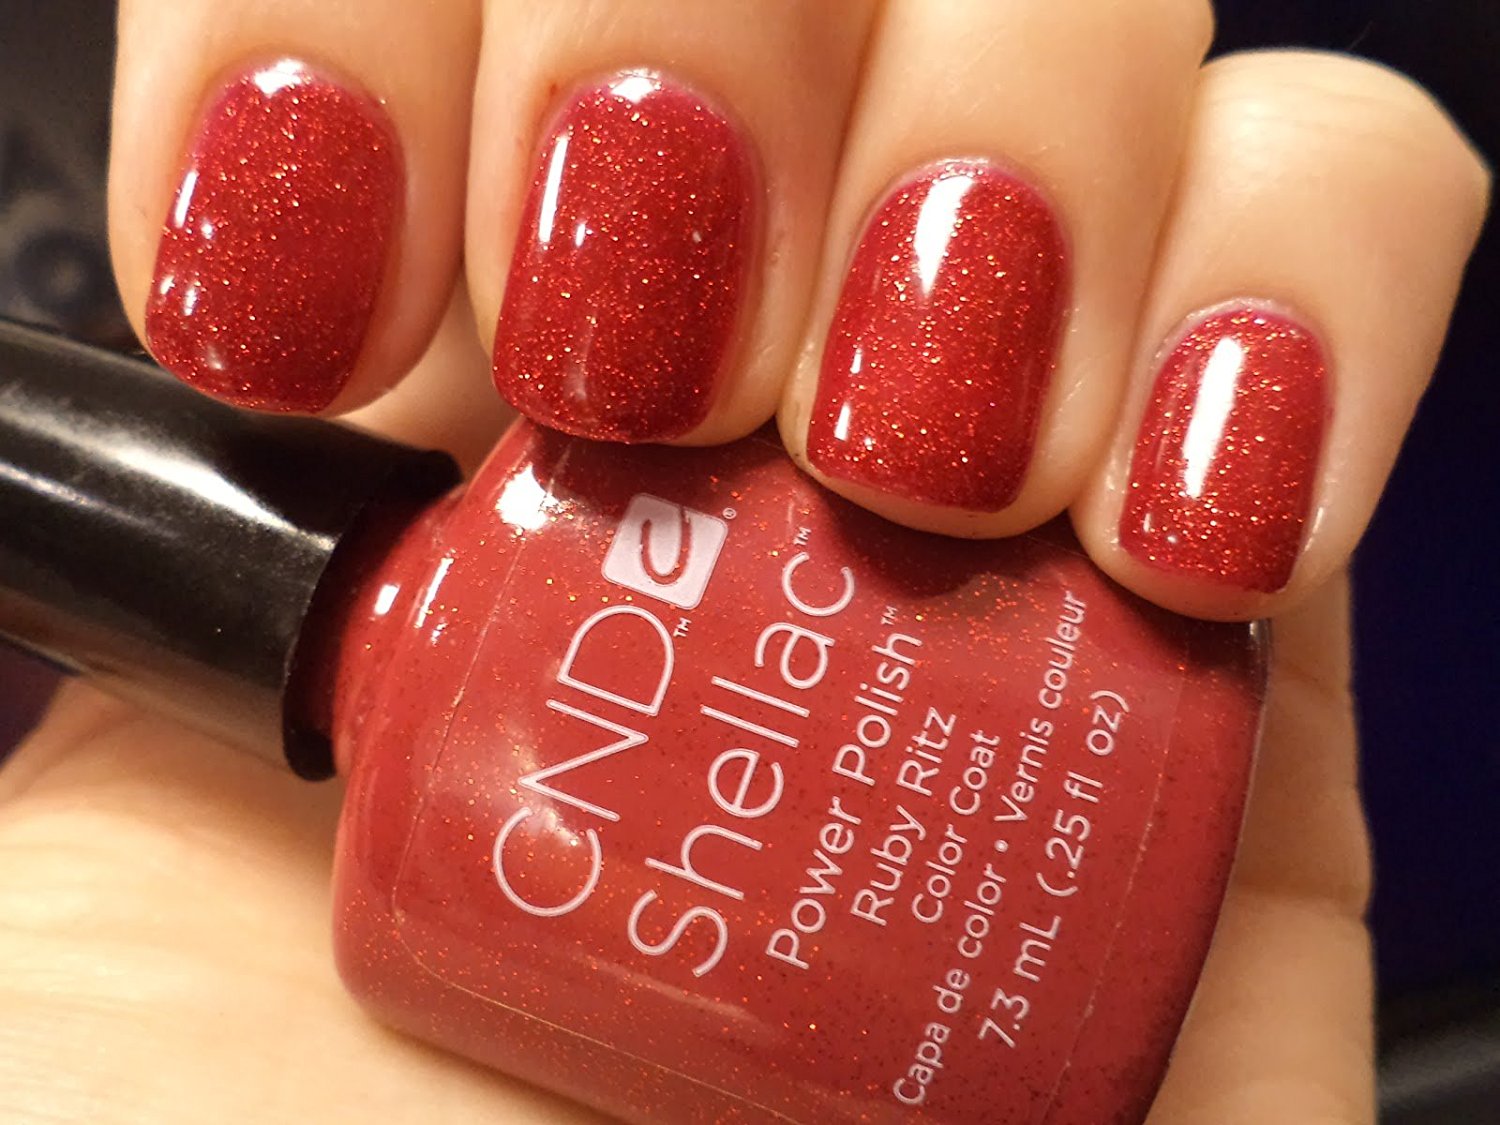 3. How to Apply Reveal Shellac Nail Polish - wide 4